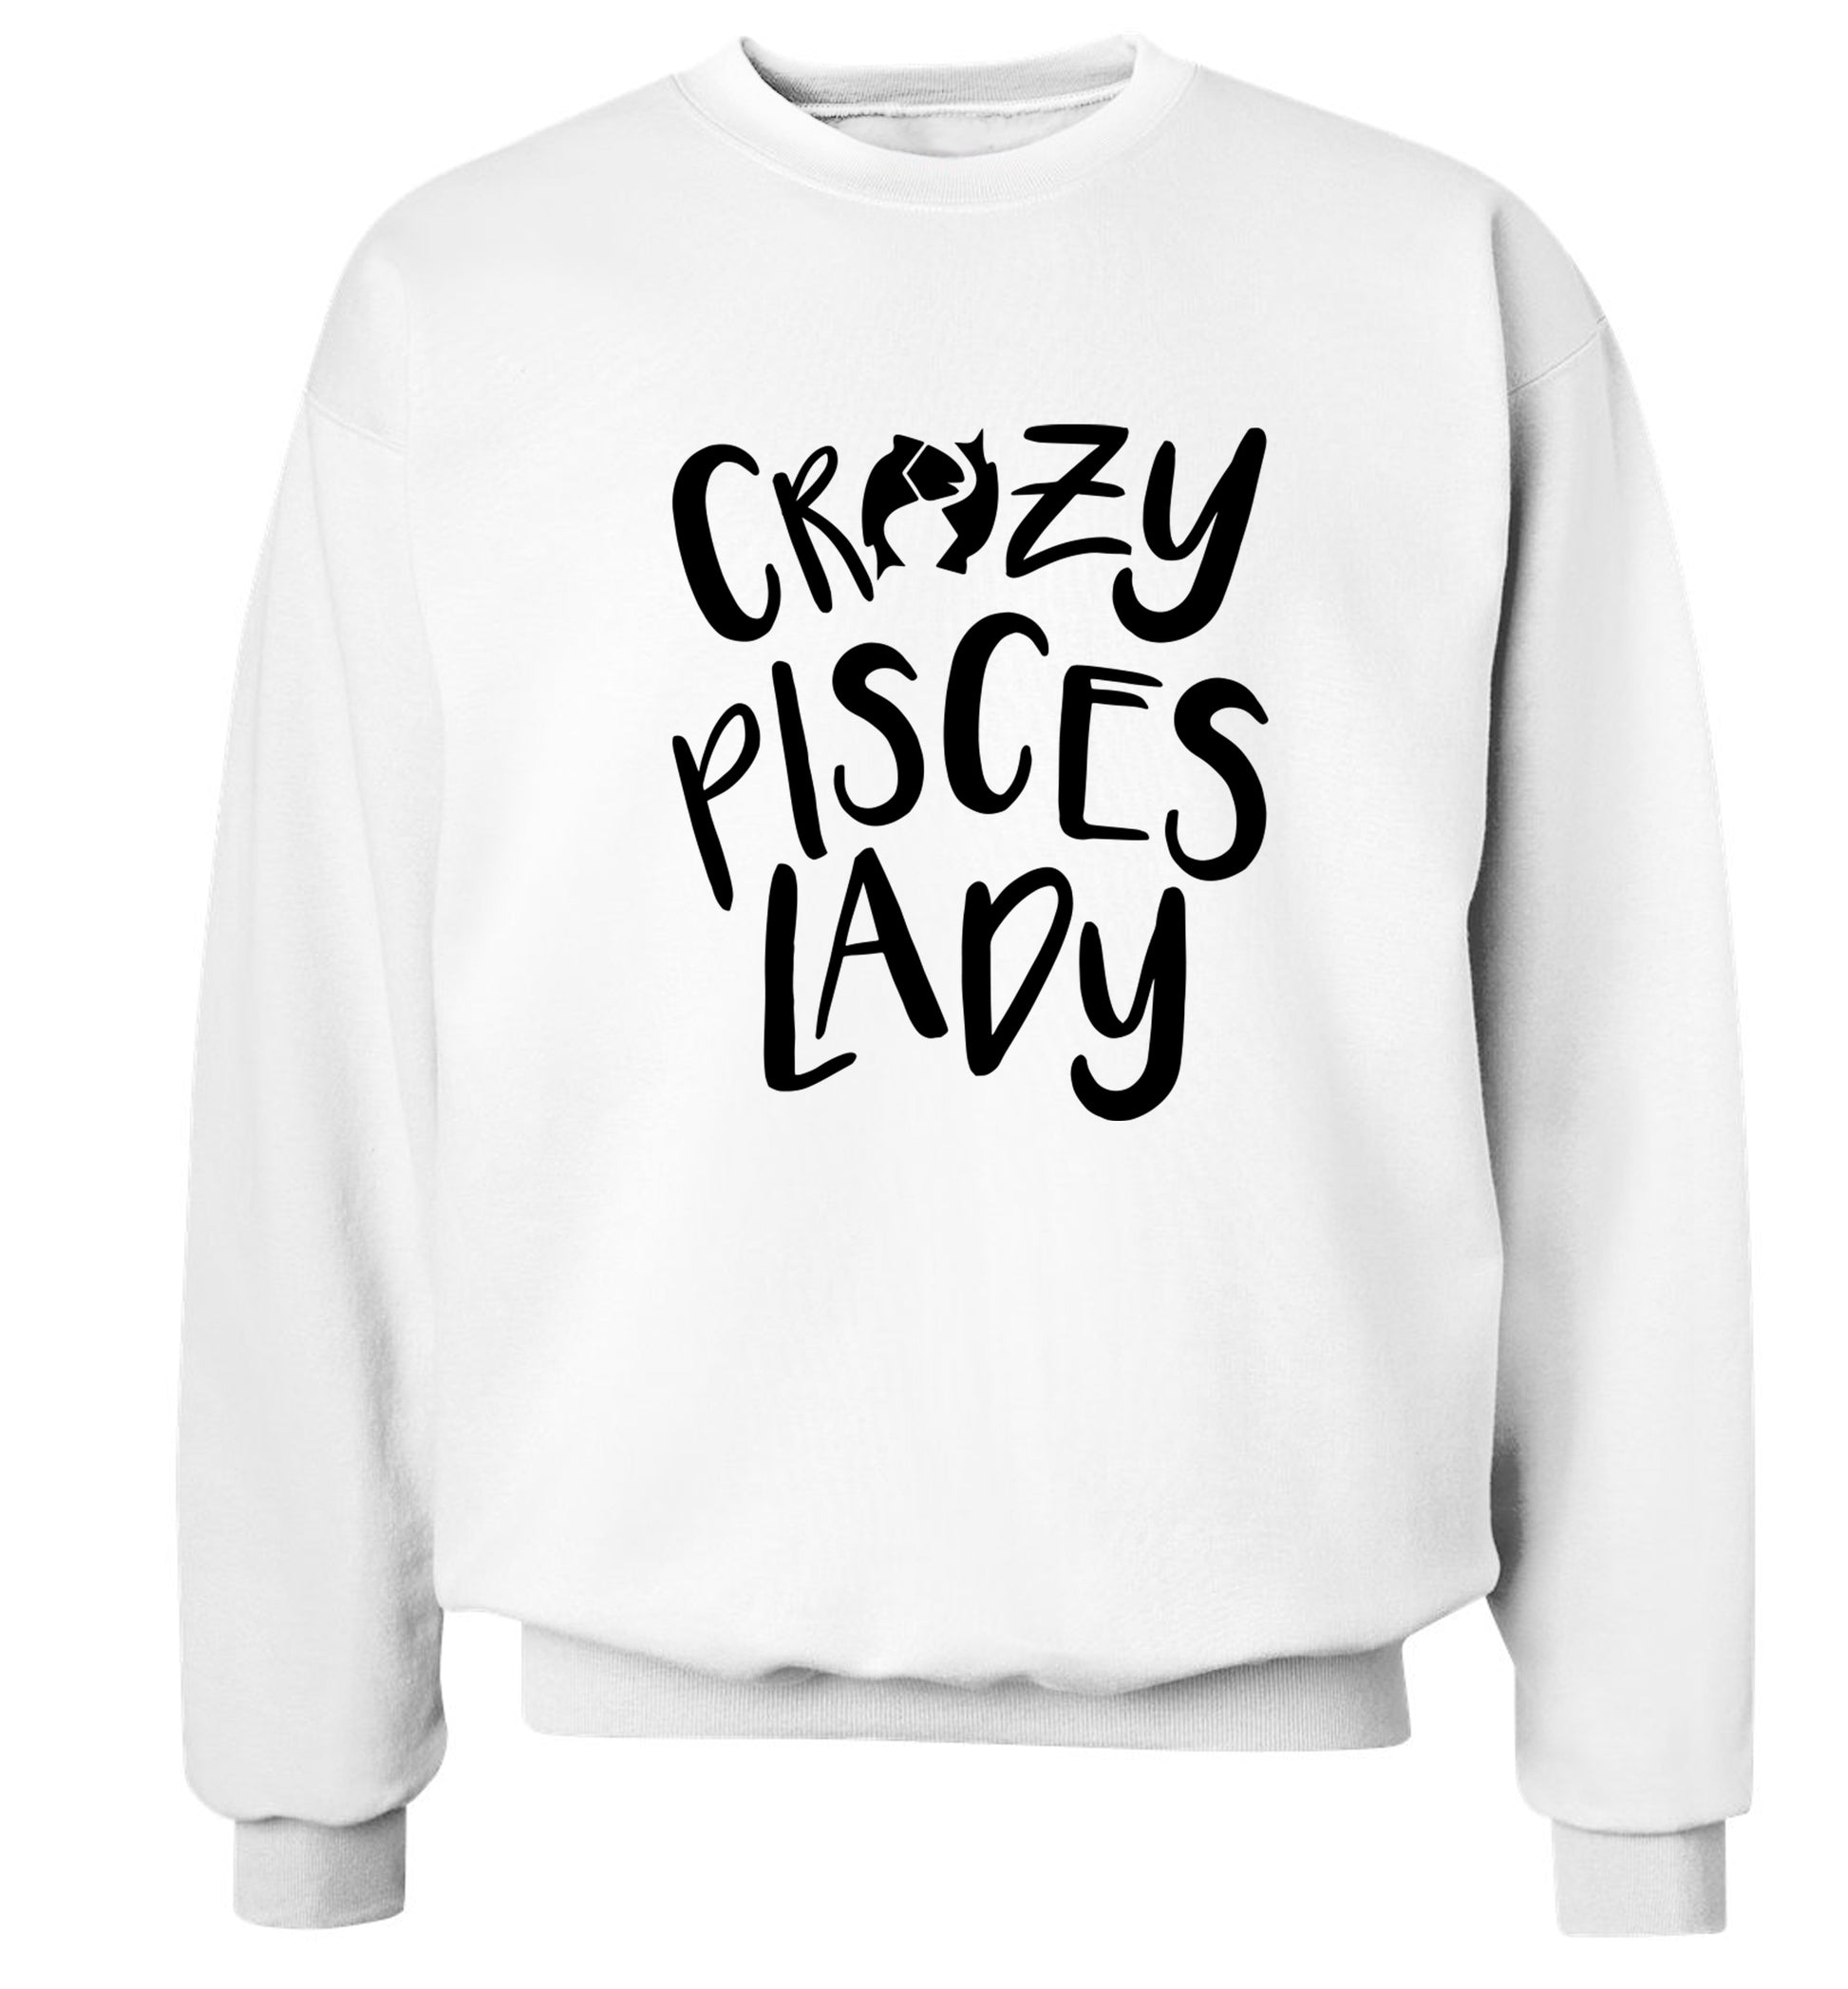 Crazy pisces Lady Adult's unisex white Sweater 2XL